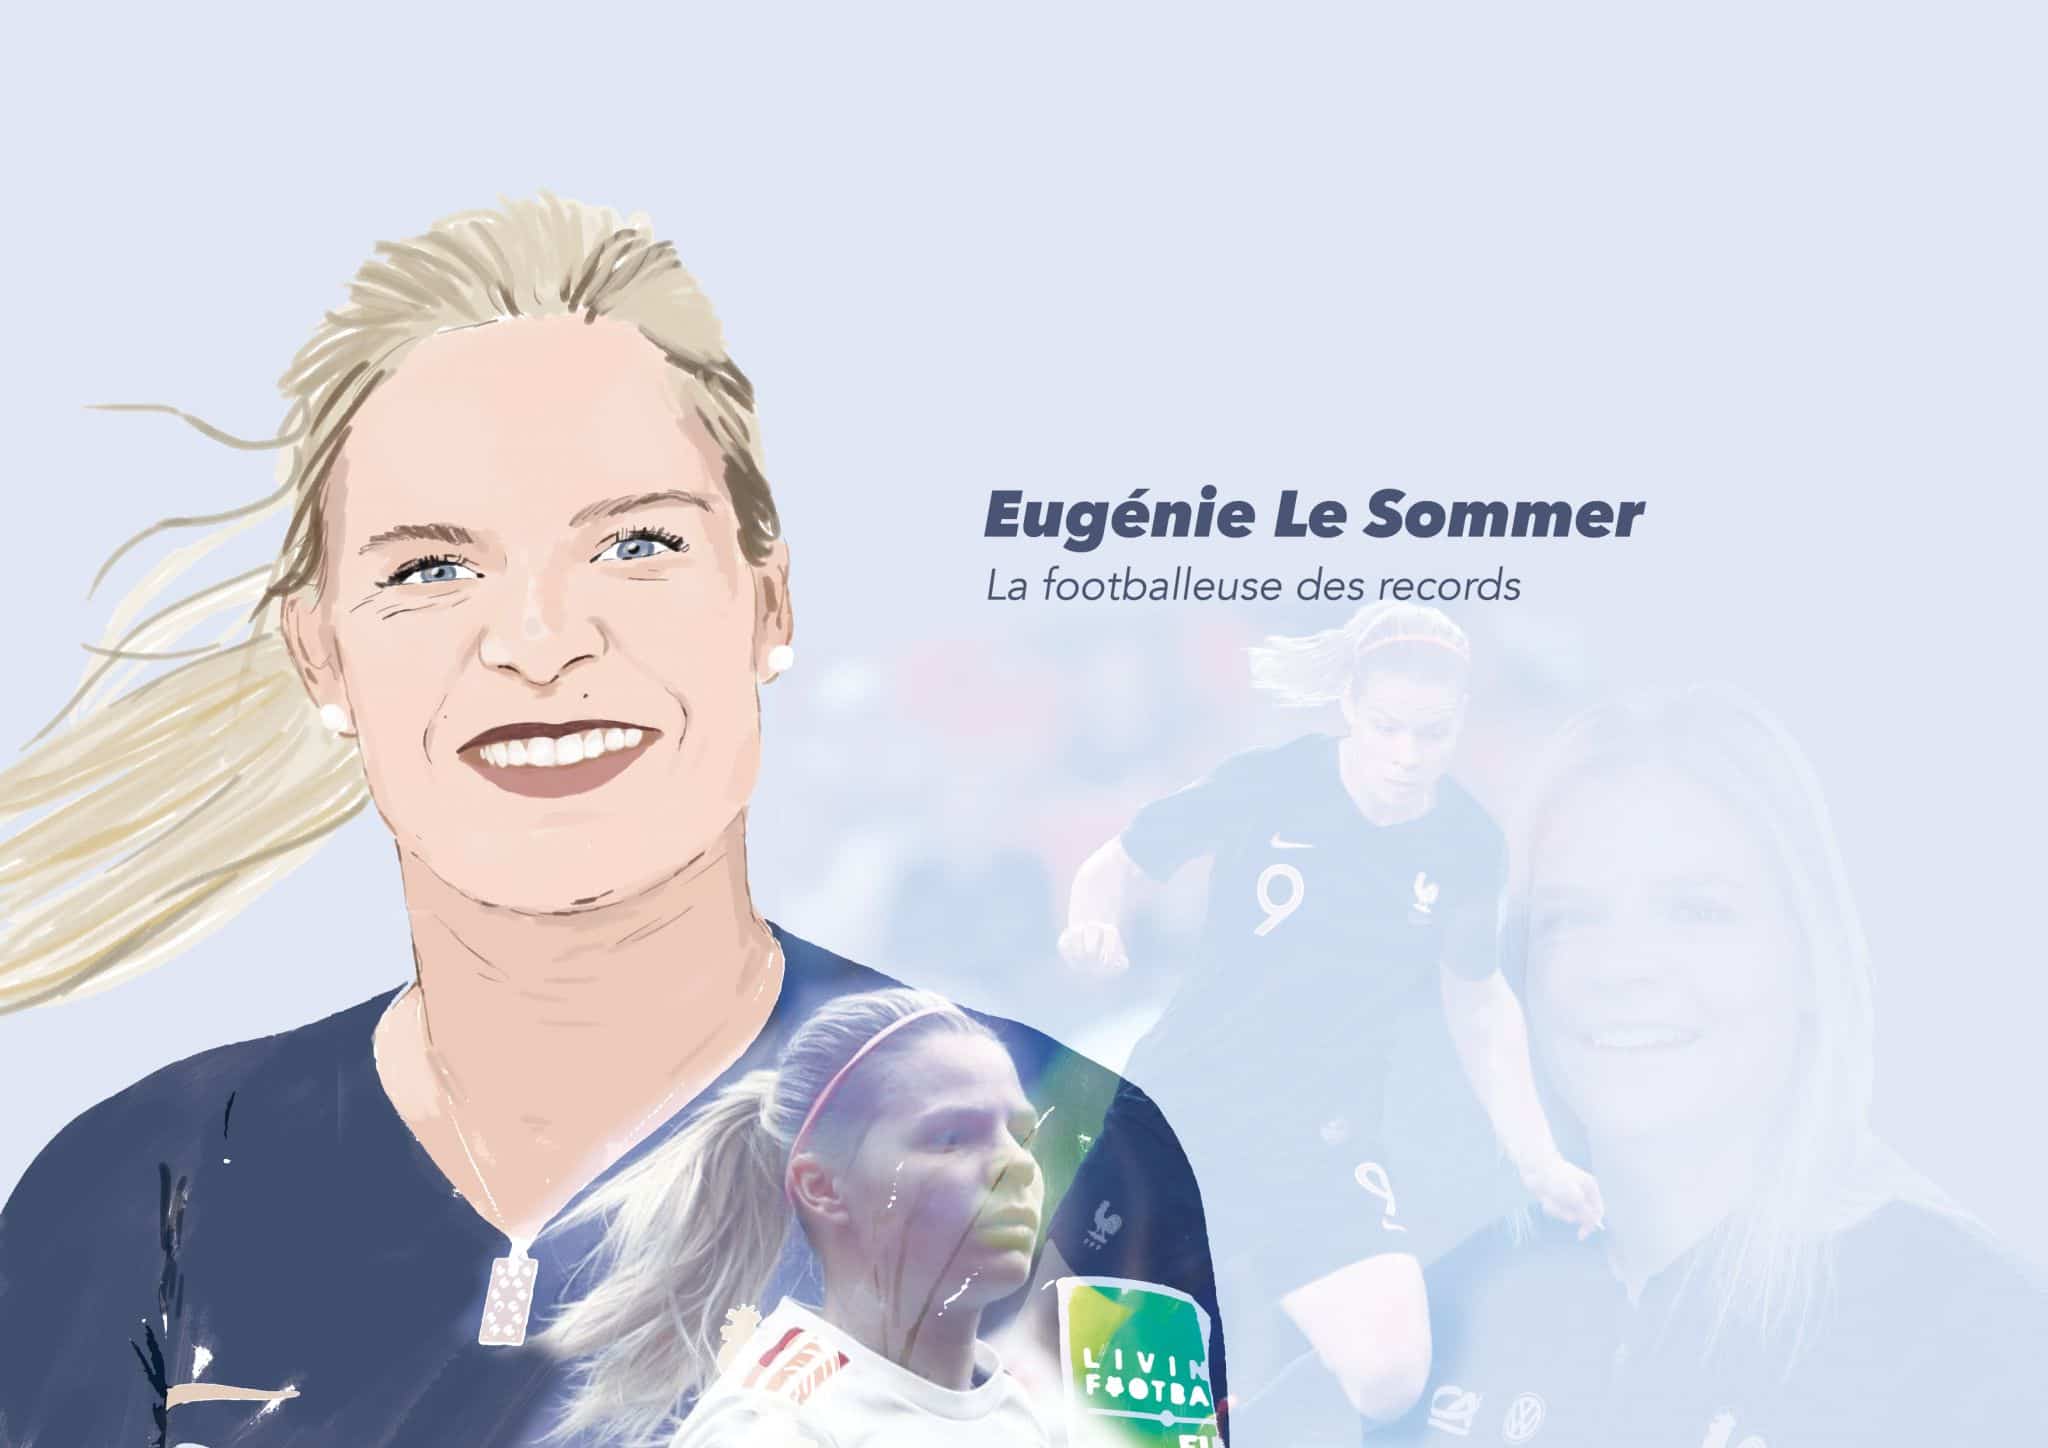 eugenie-le-sommer-celles-qui-osent-CQO